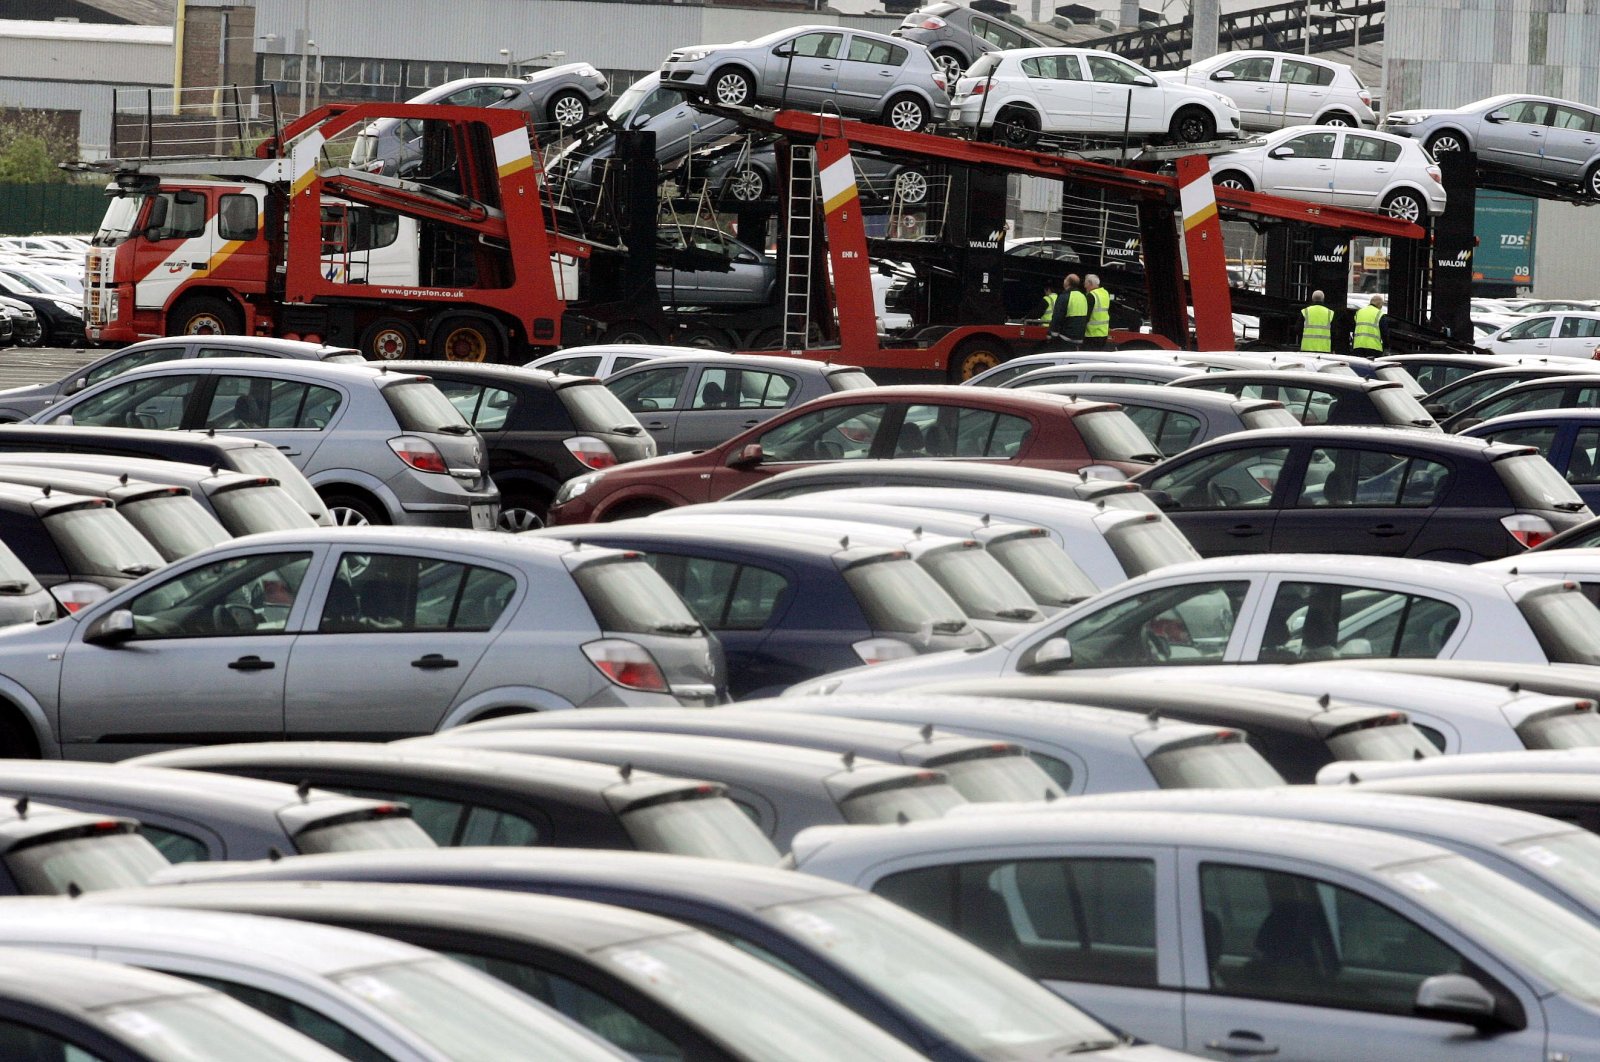 A car transporter is loaded amongst rows of Vauxhall Astra cars outside the Vauxhall plant at Ellesmere Port near Liverpool, northern England on May 16, 2006.